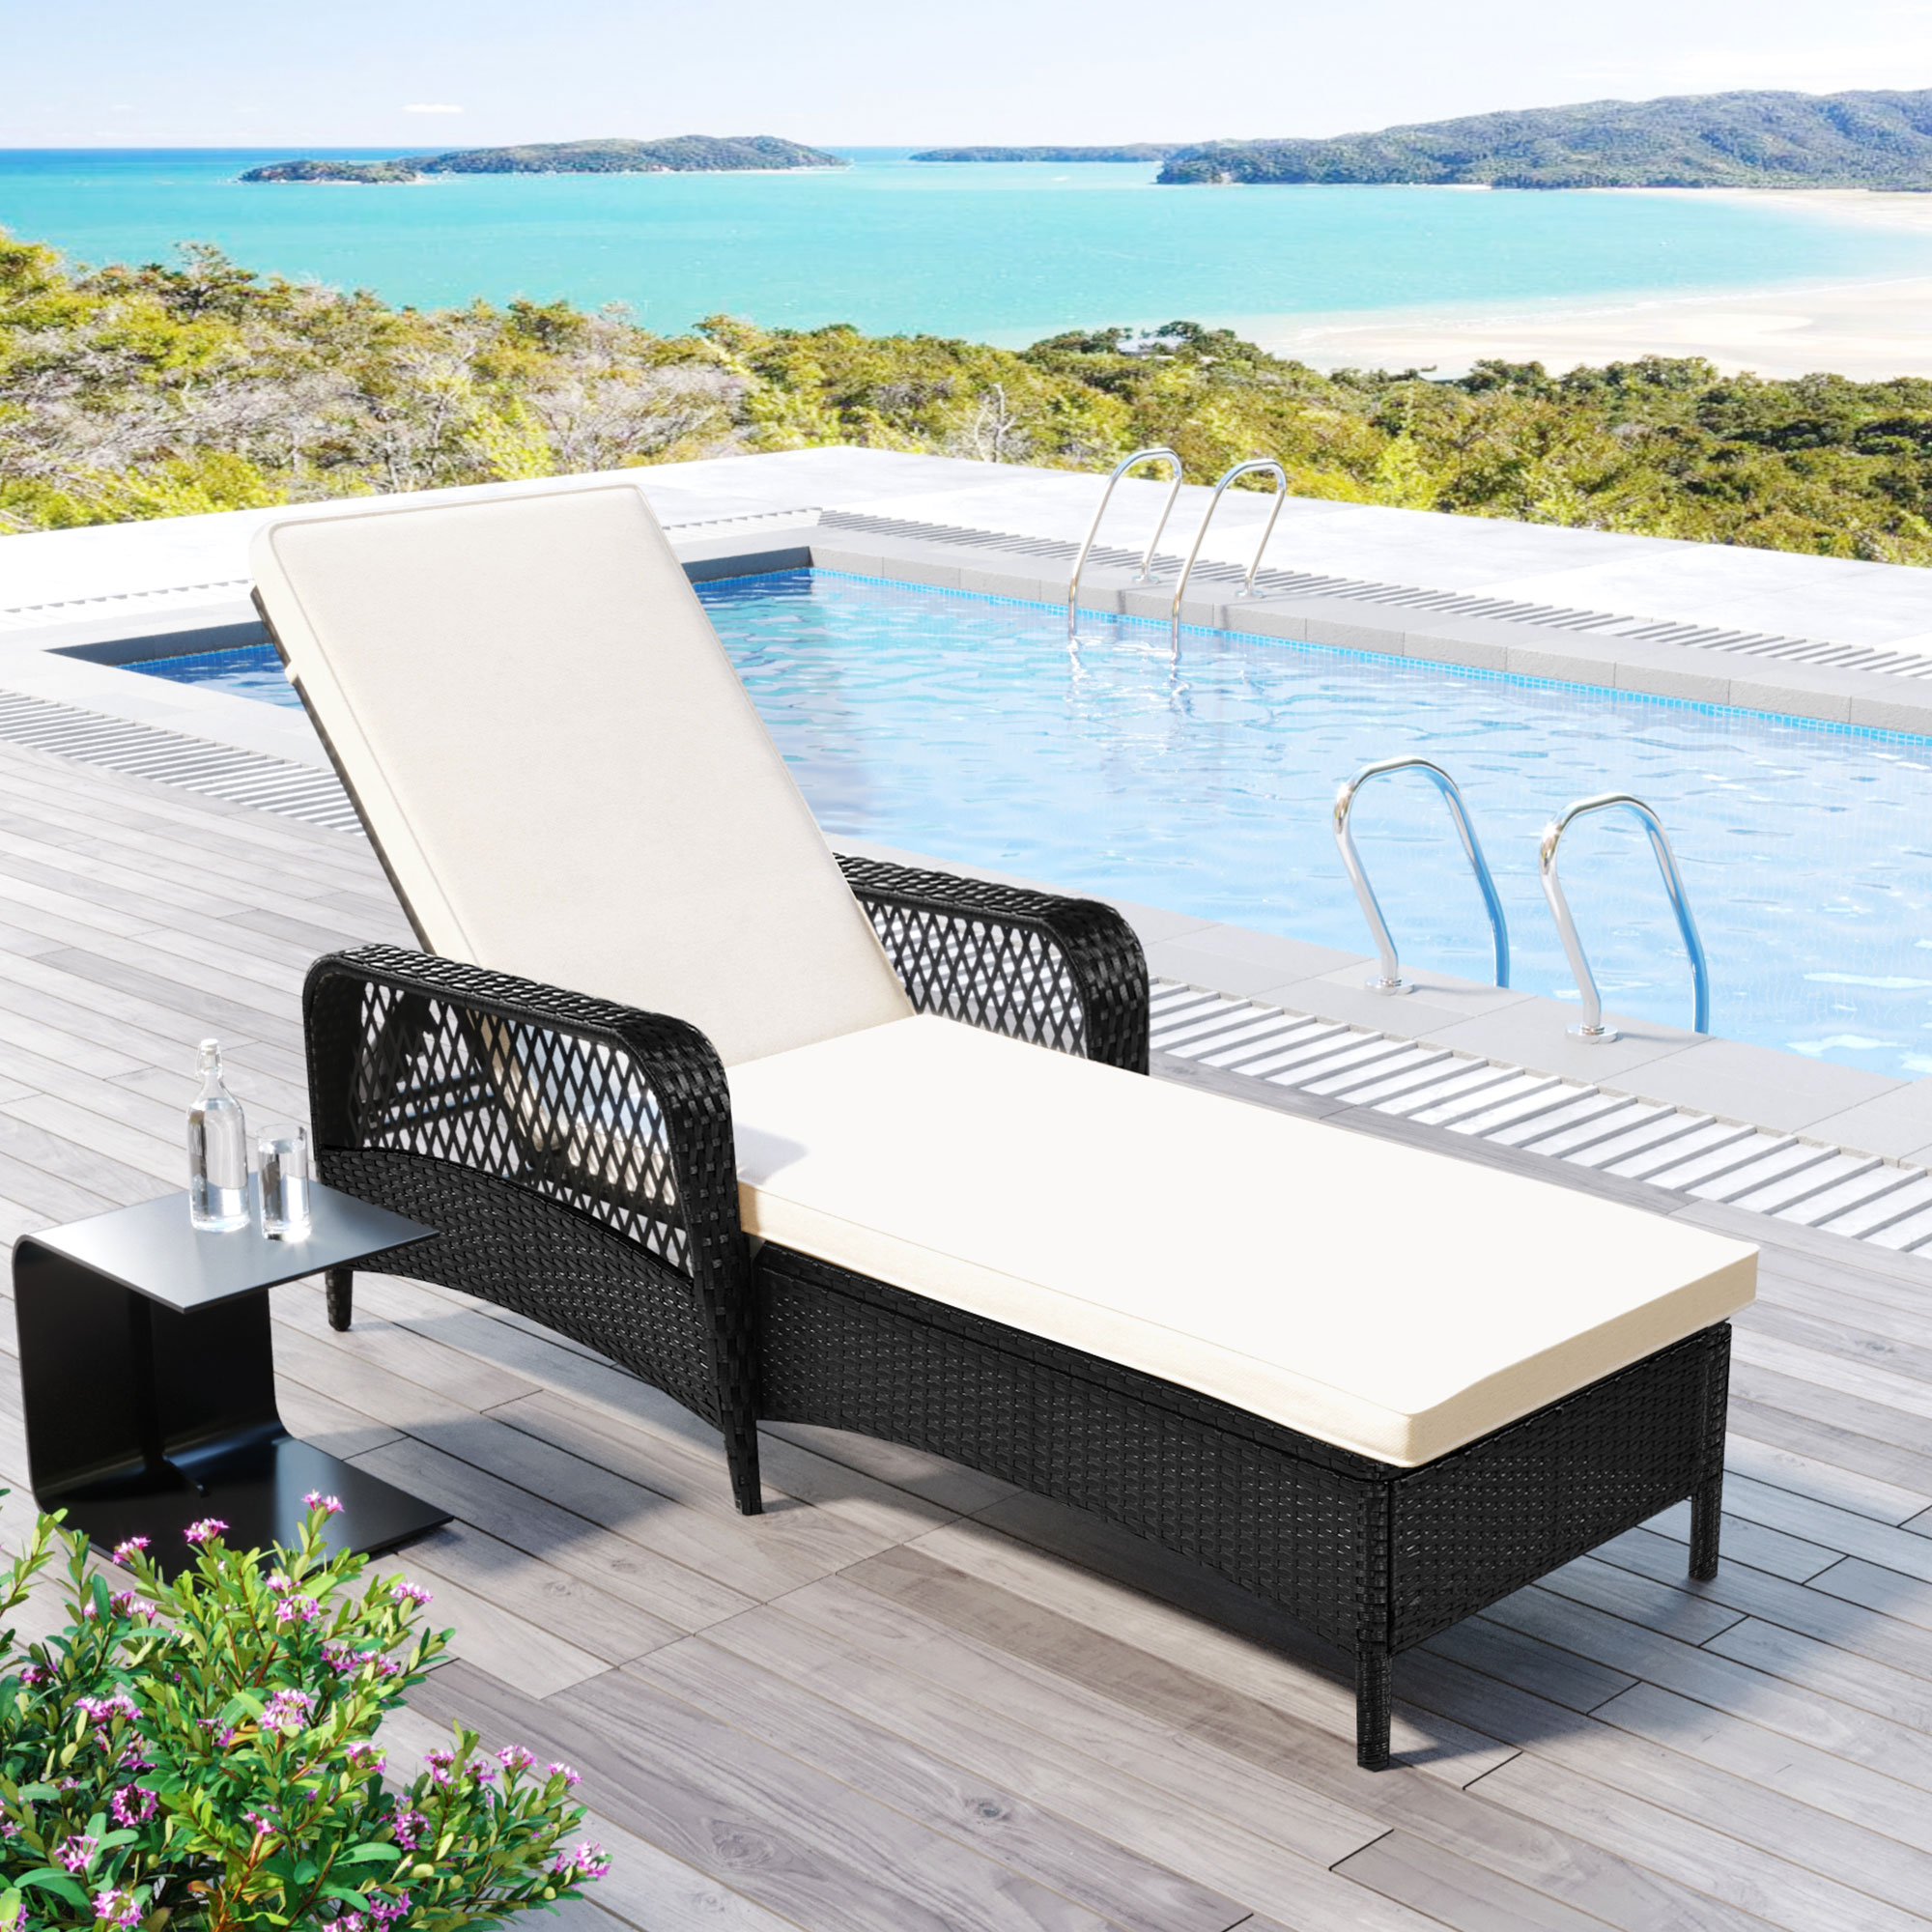 Outdoor Patio Reclining Chair Sunbed with Adjustable Backrest, Black Wicker All-Weather Chaise Lounge Chair for Garden Yard Patio - image 1 of 8